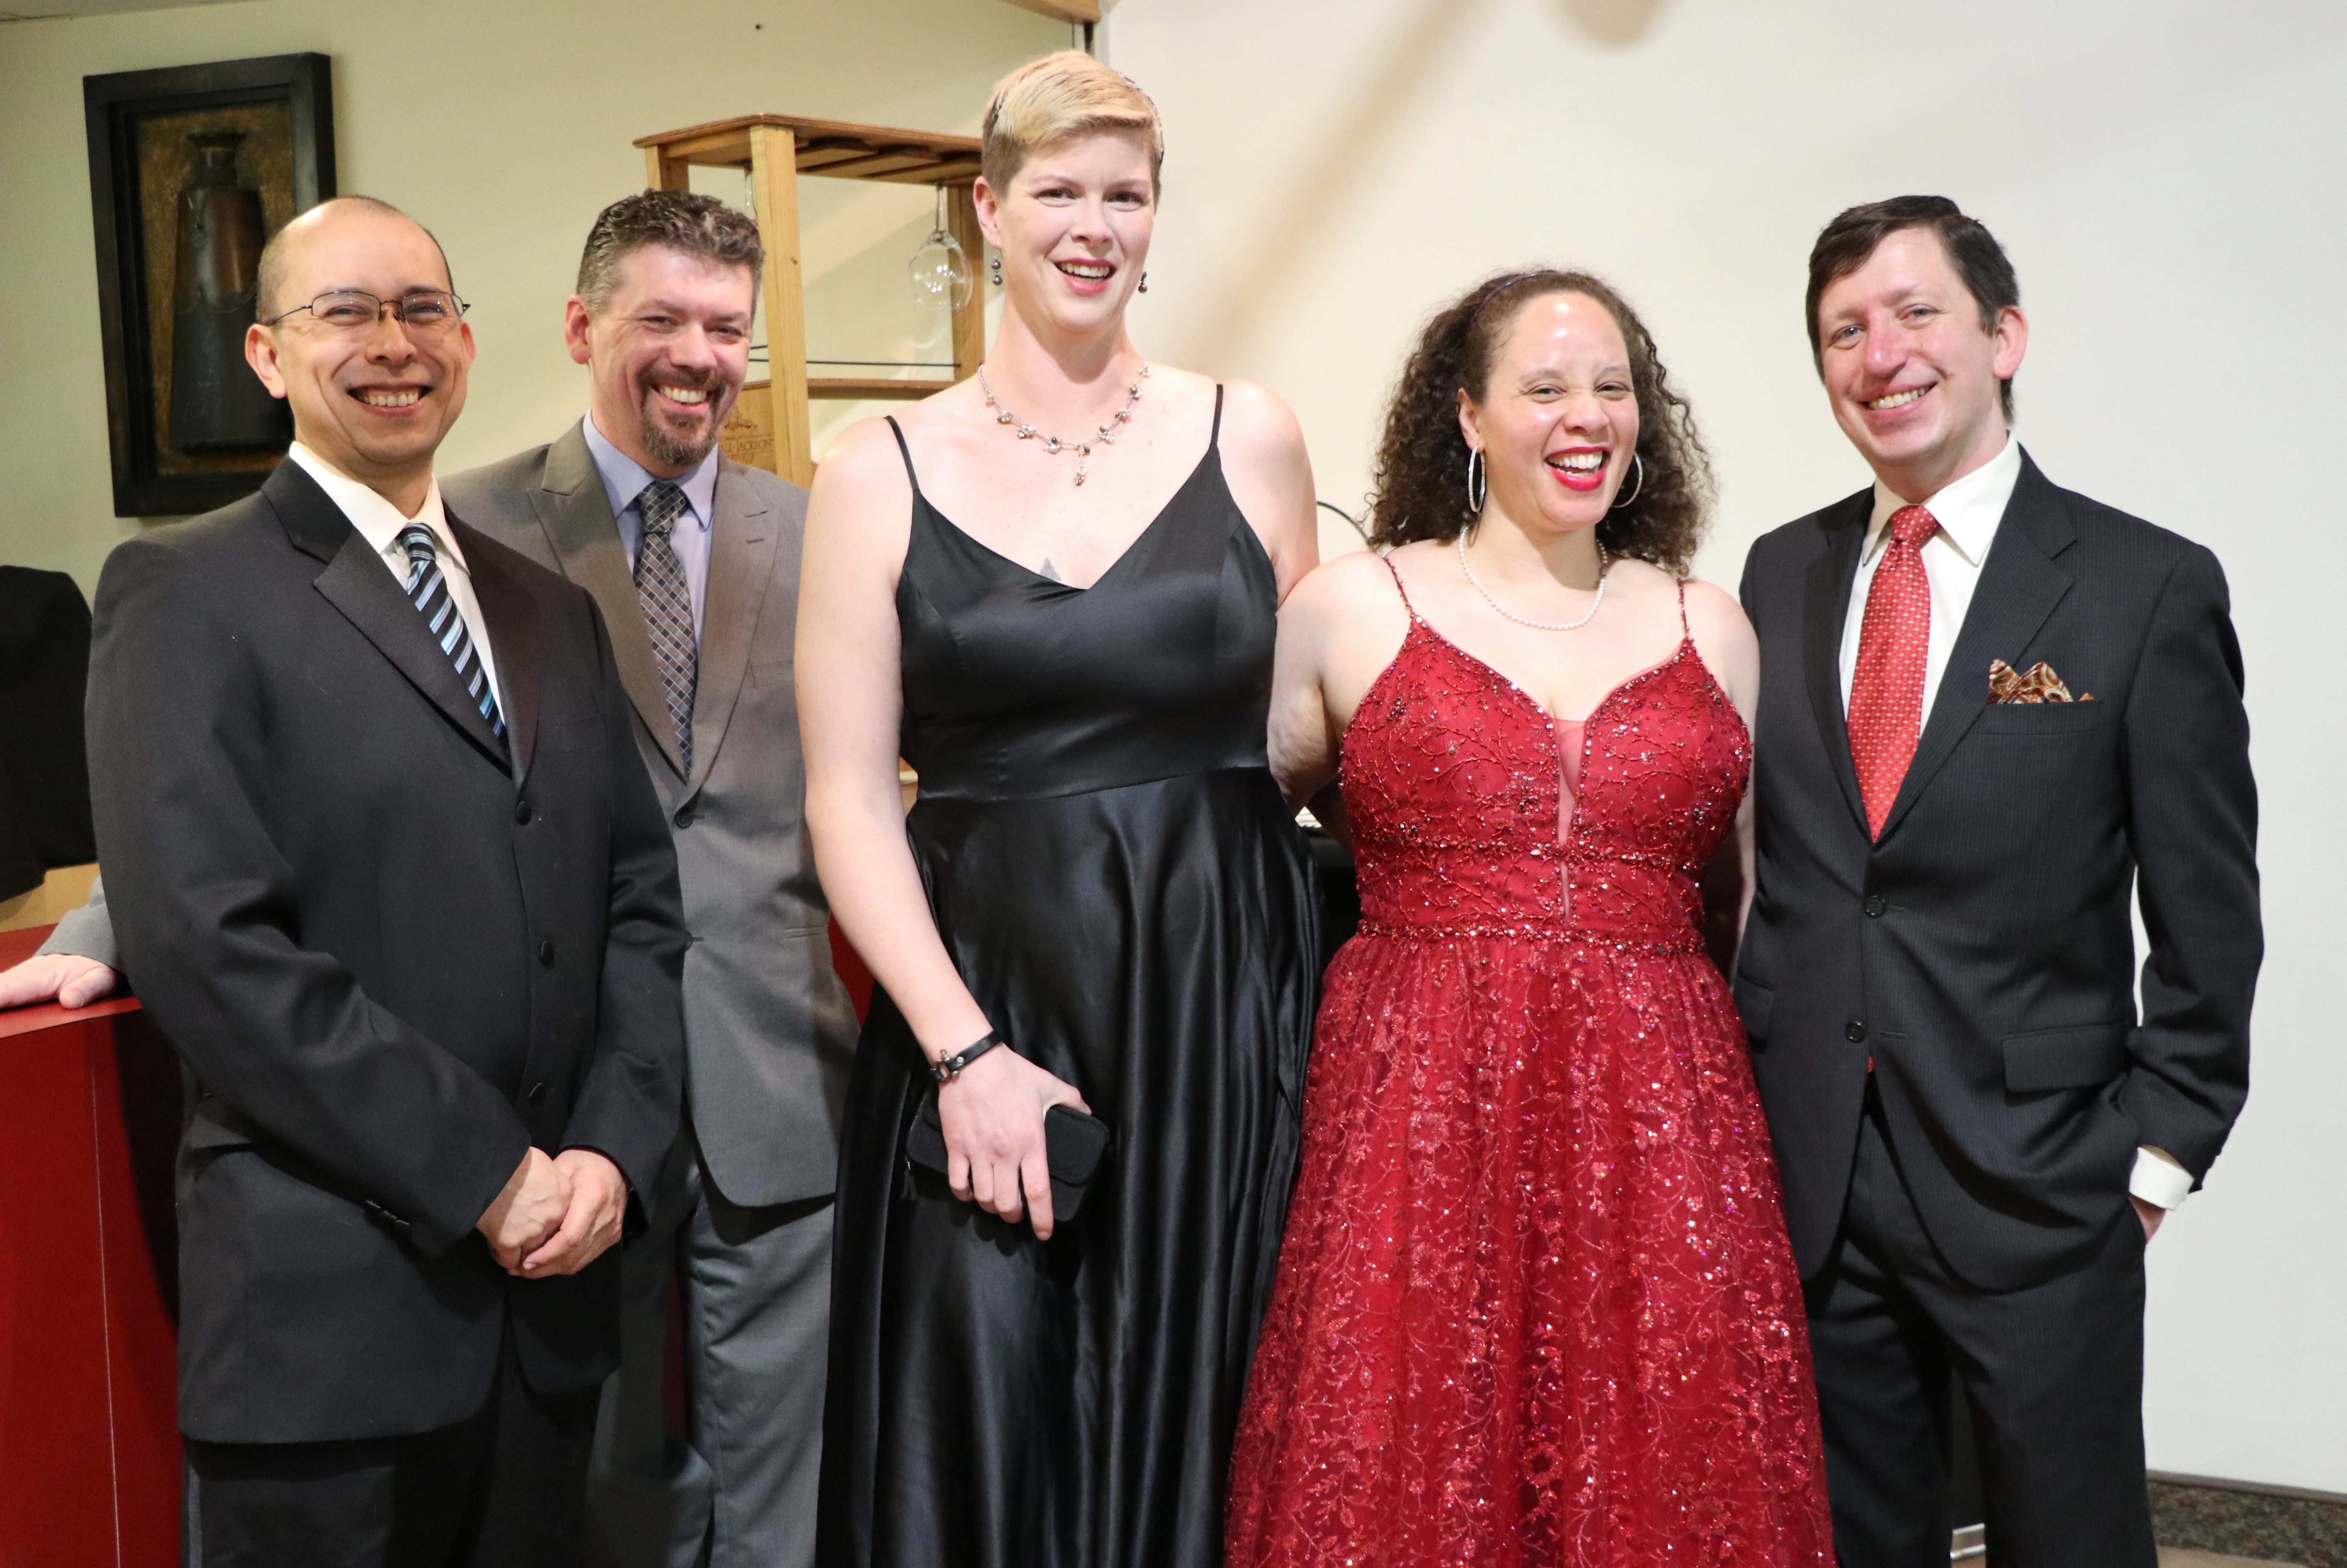 Carlos Perez, a bald Latino man with glasses in a suit and tie, Ajen Lewis, a white man with a beard in suit and tie, Cassie Lee, a tall white woman with short blonde hair in a black evening gown, Charlie Sobel, a biracial woman with long curly hair in a red evening gown, Joe Sobel, a smiling white man in a suit and tie